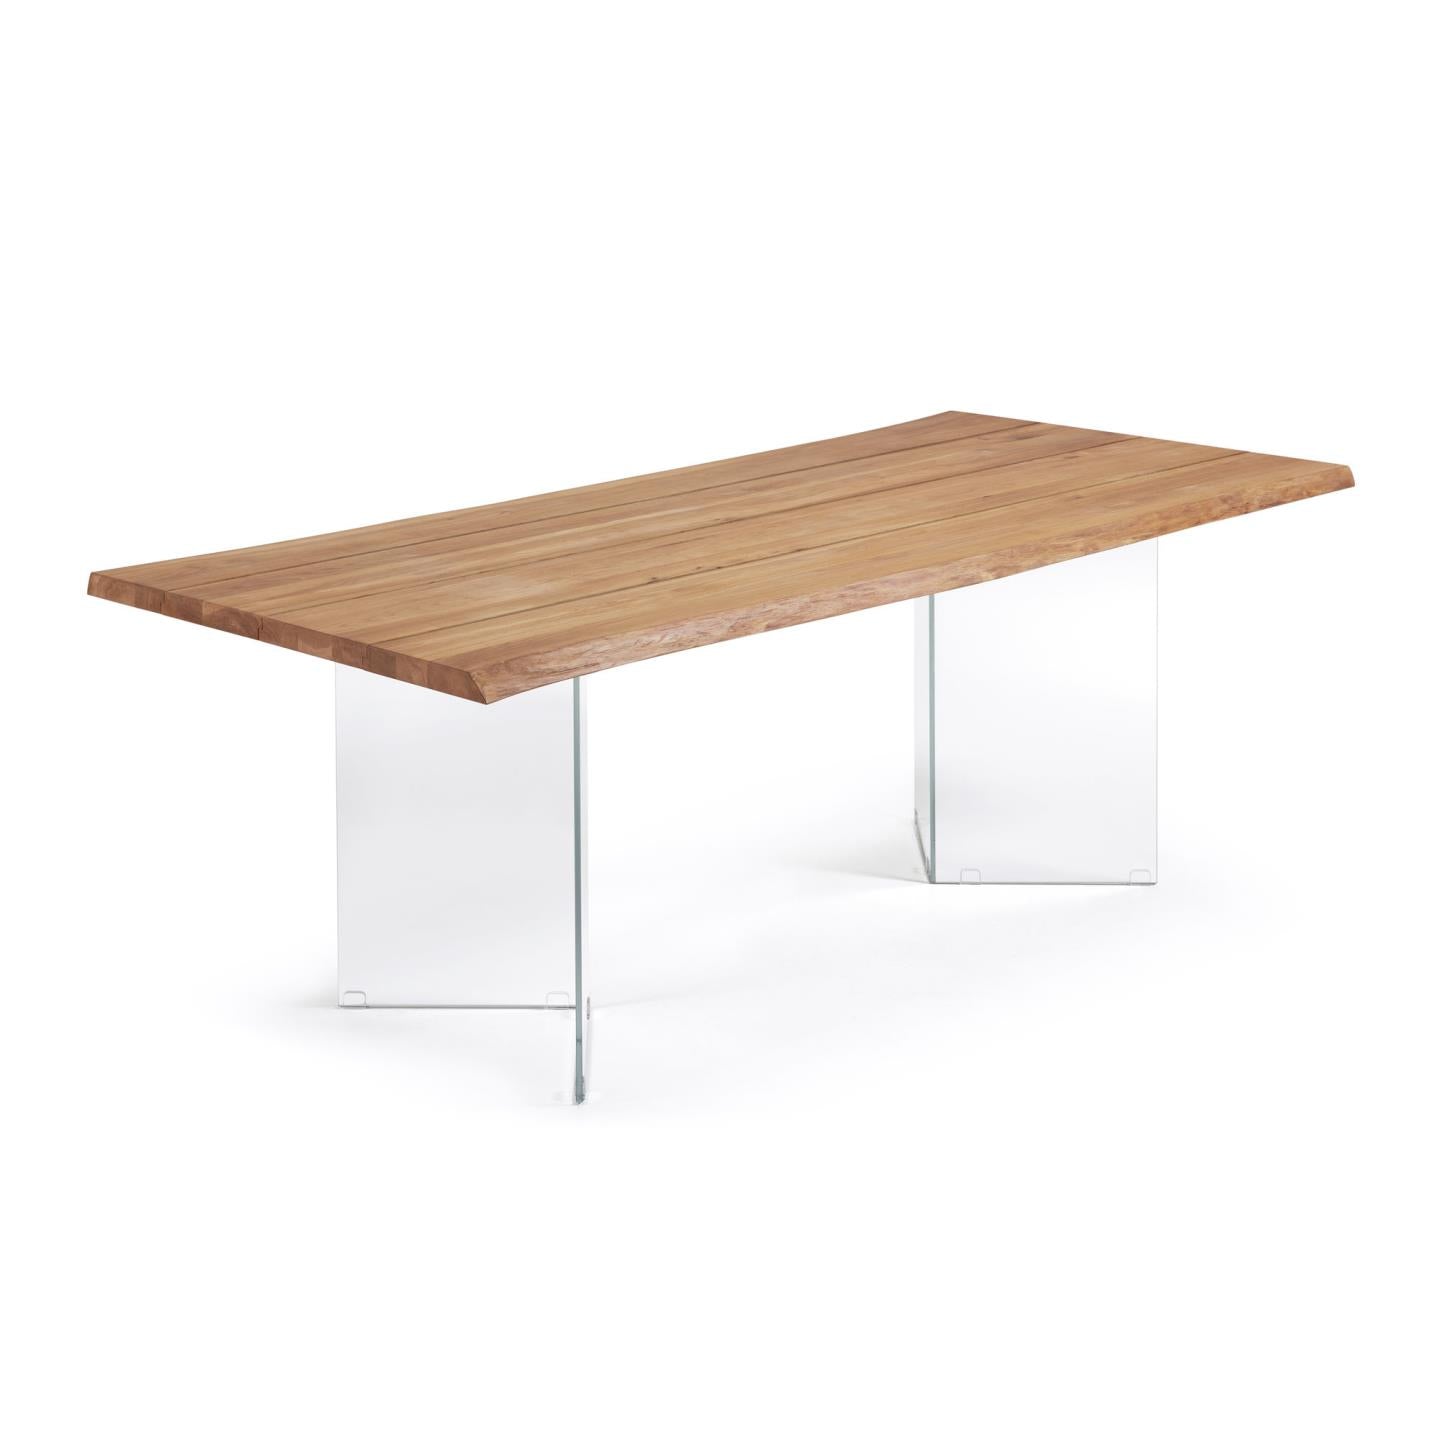 Lotty oak veneer table wit a natural finish and glass legs, 220 x 100 cm